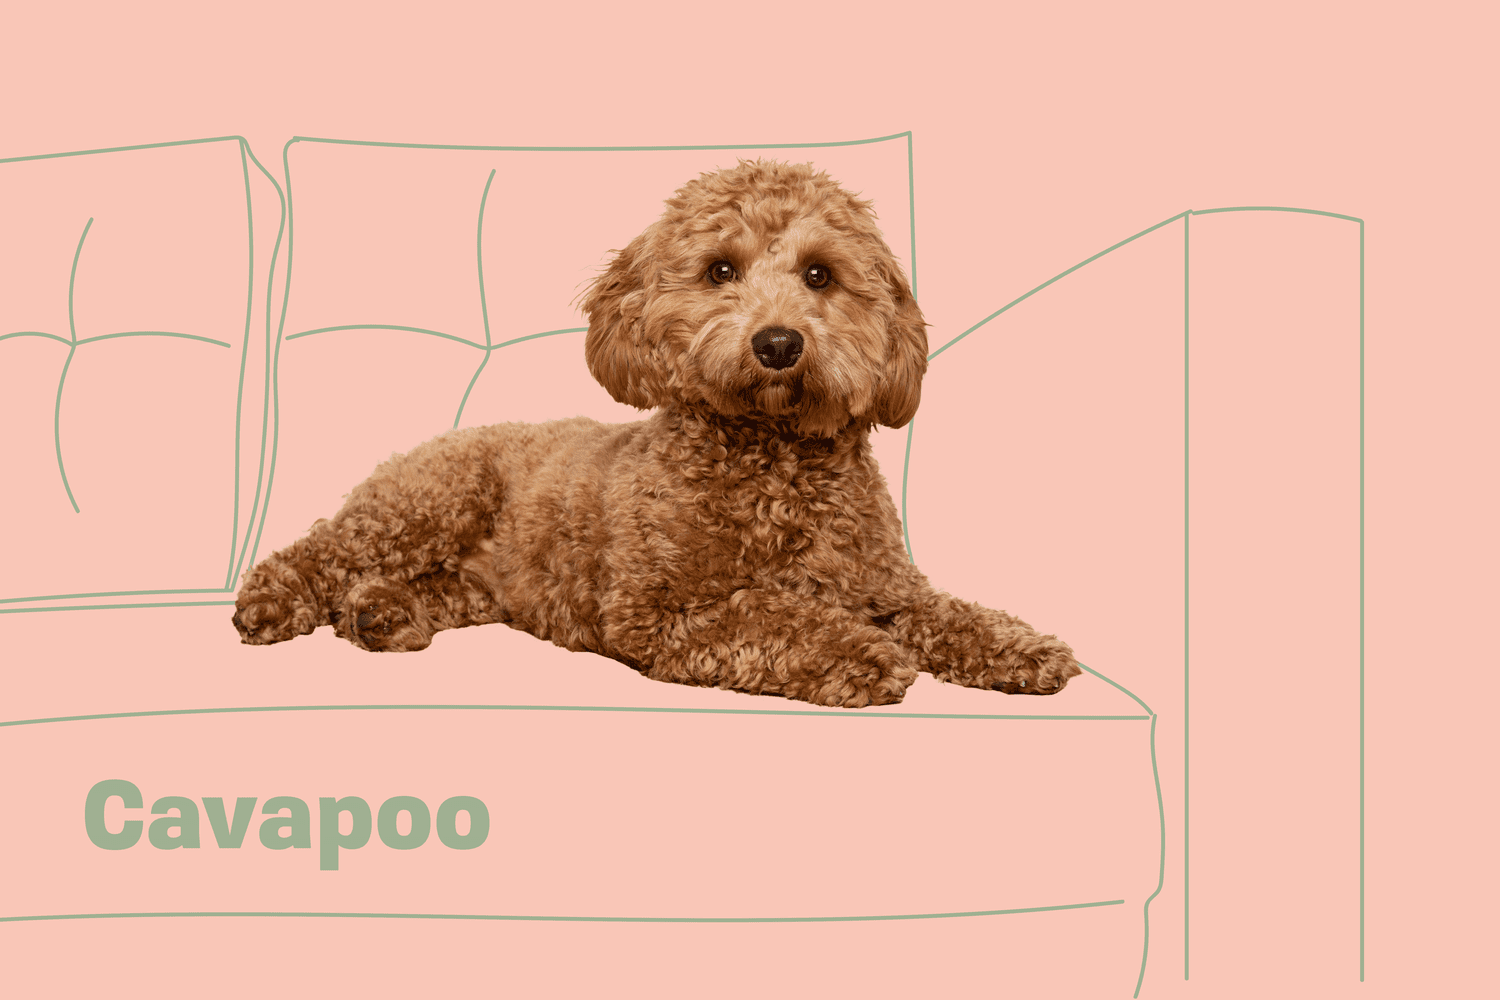 Cavapoo dog laying on illustrated couch